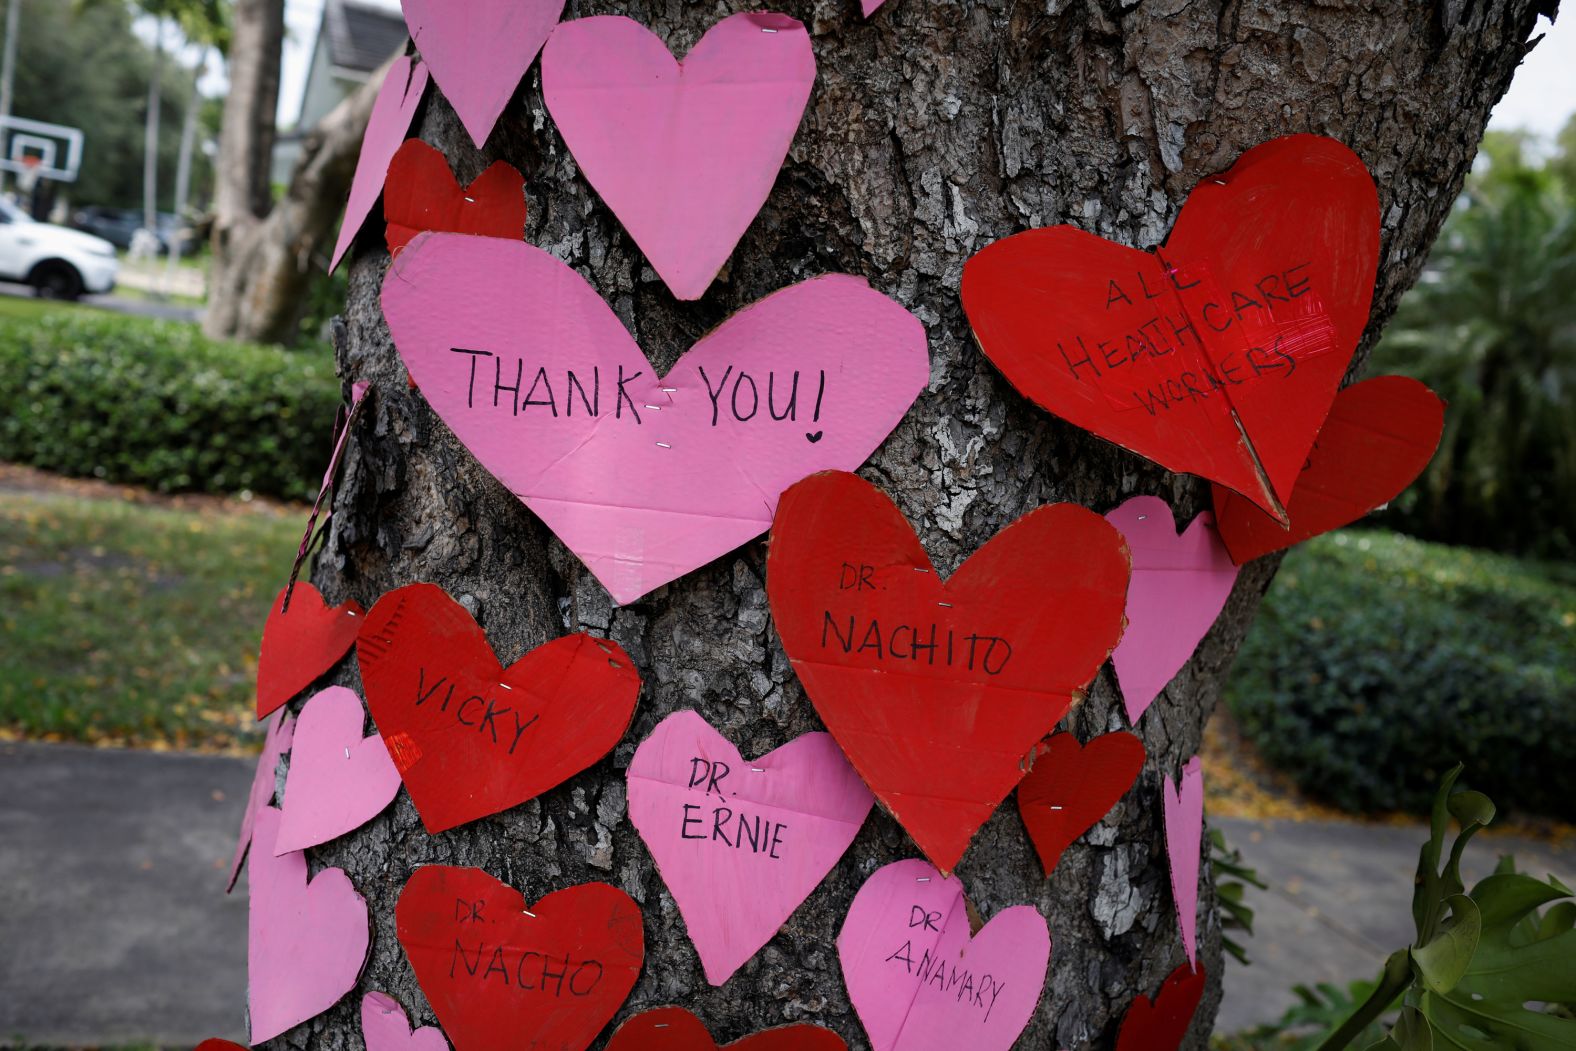 Written tributes to health-care workers and first responders are posted on a tree in Miami on April 13.